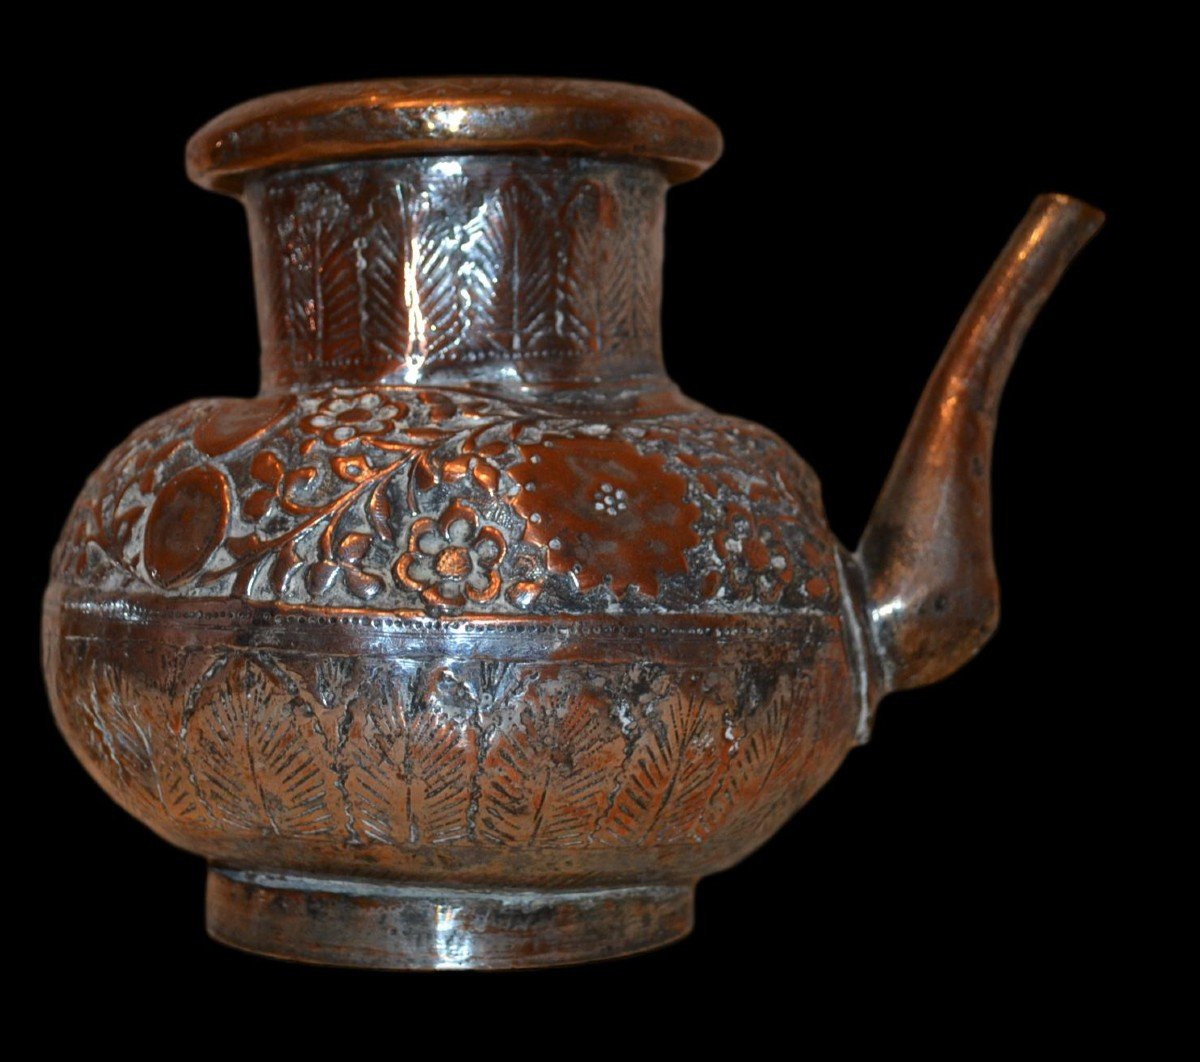 Kindi, Holy Water Pot, North India, Copper And Bronze, 19th Century-photo-4